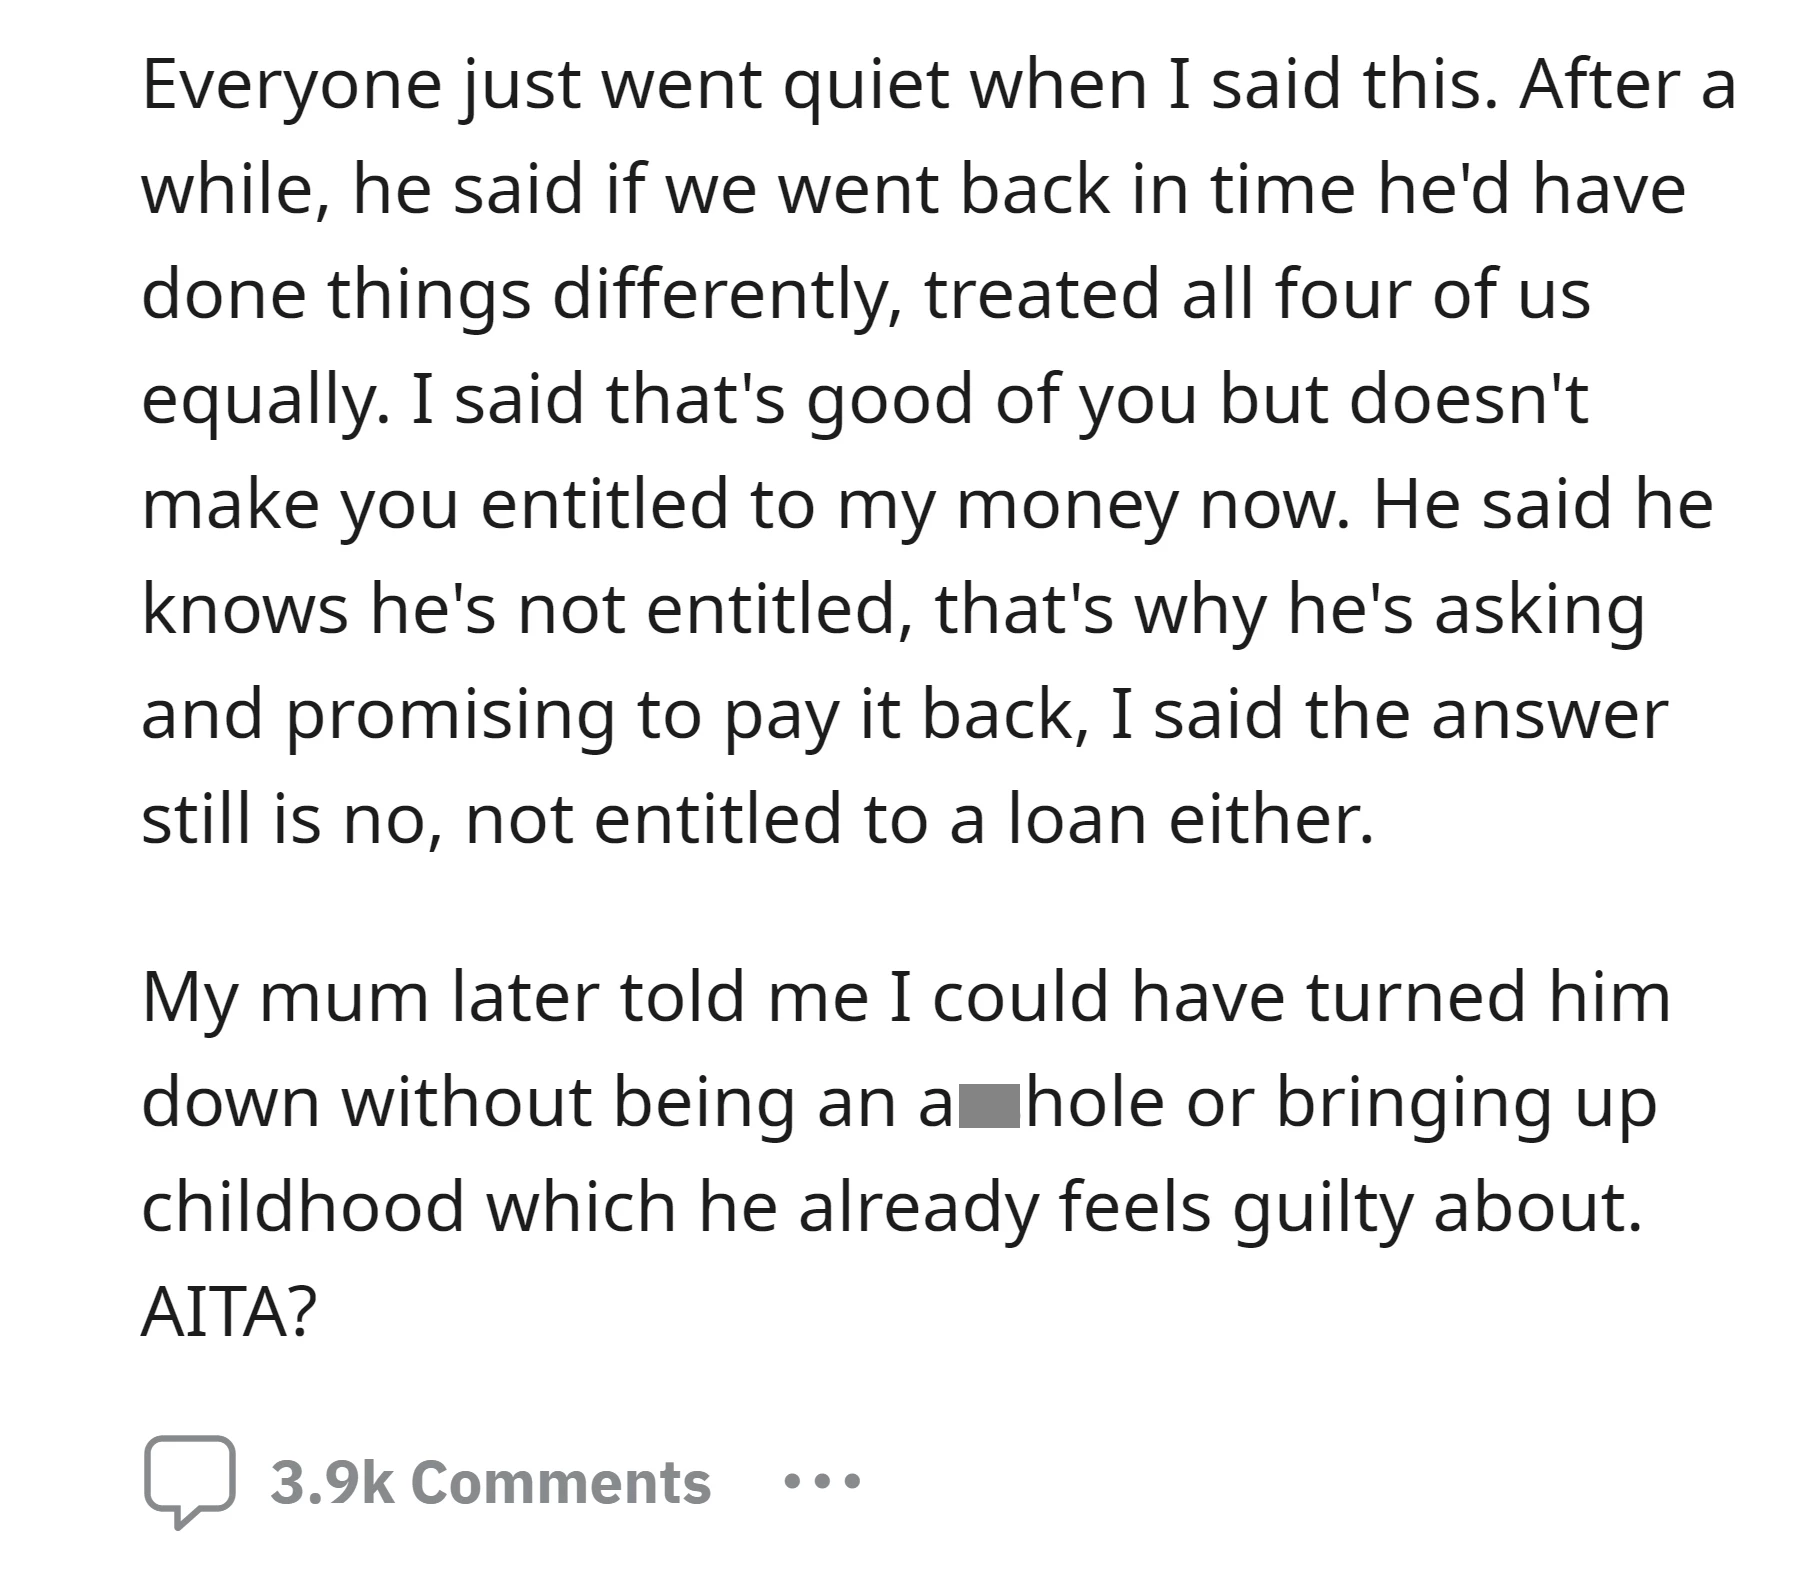 OP brought up past disparities in assistance during her upbringing